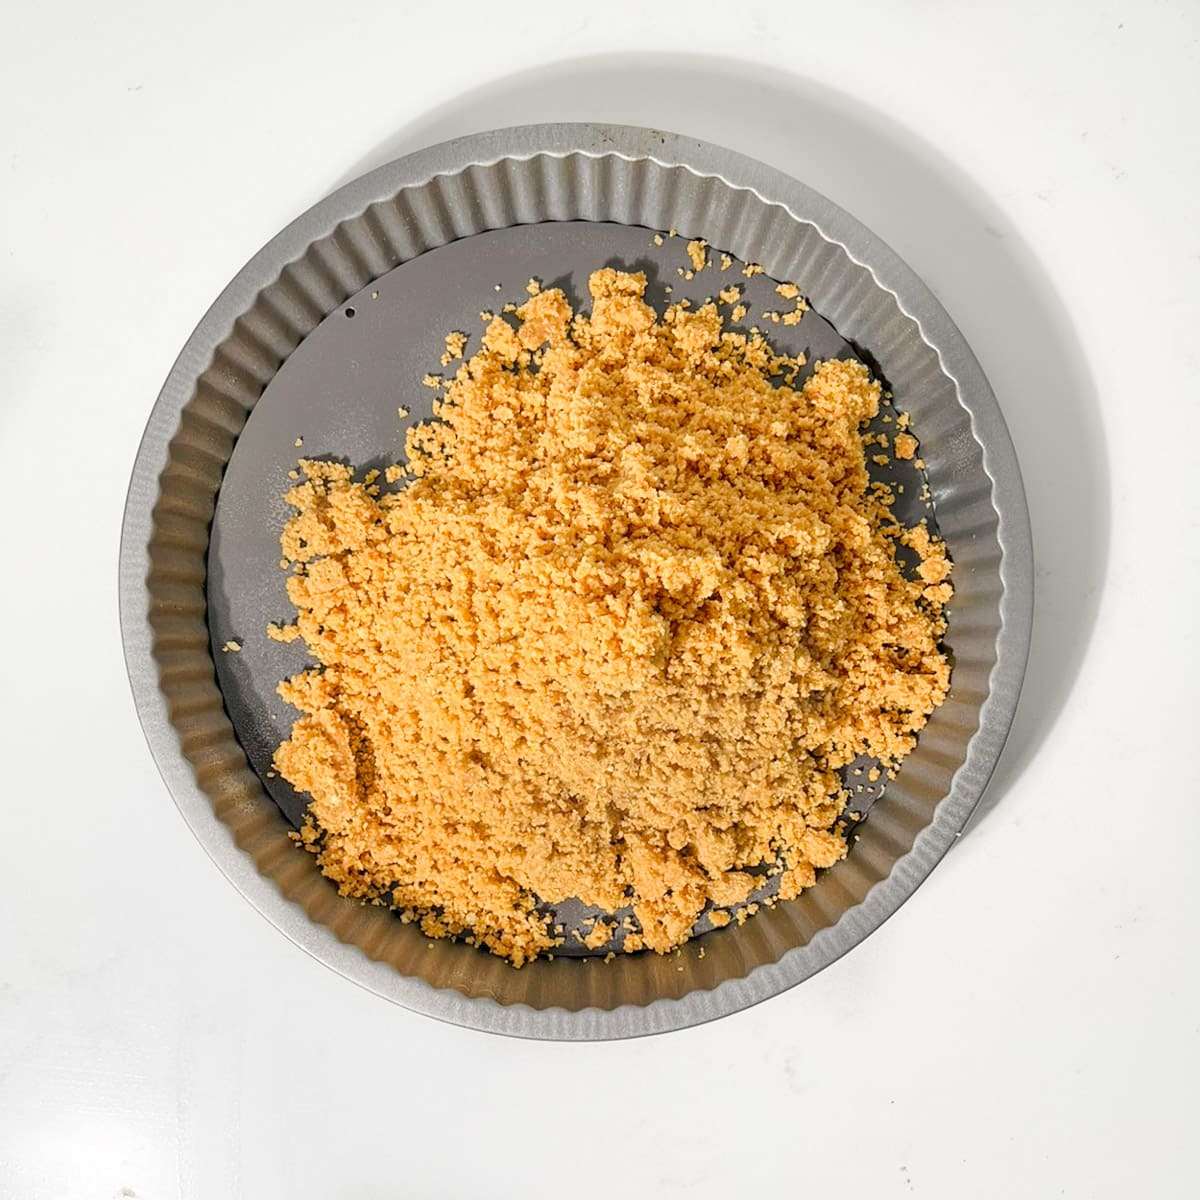 Biscuits crumbs in a tart pan.